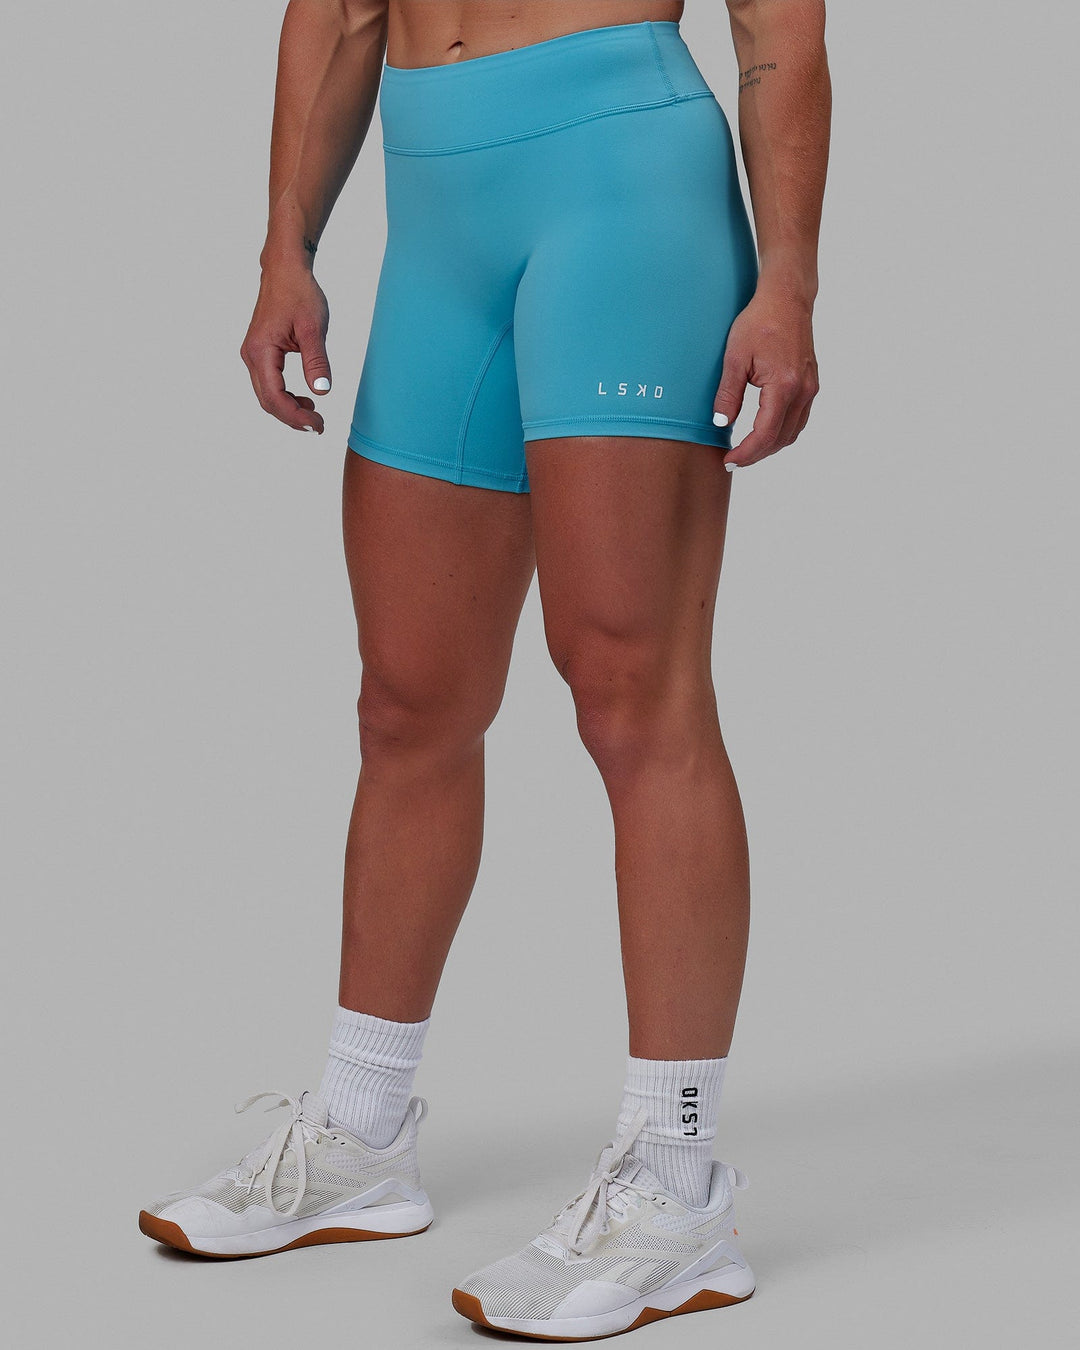 Woman wearing RXD Mid Short Tights - Pacific Blue